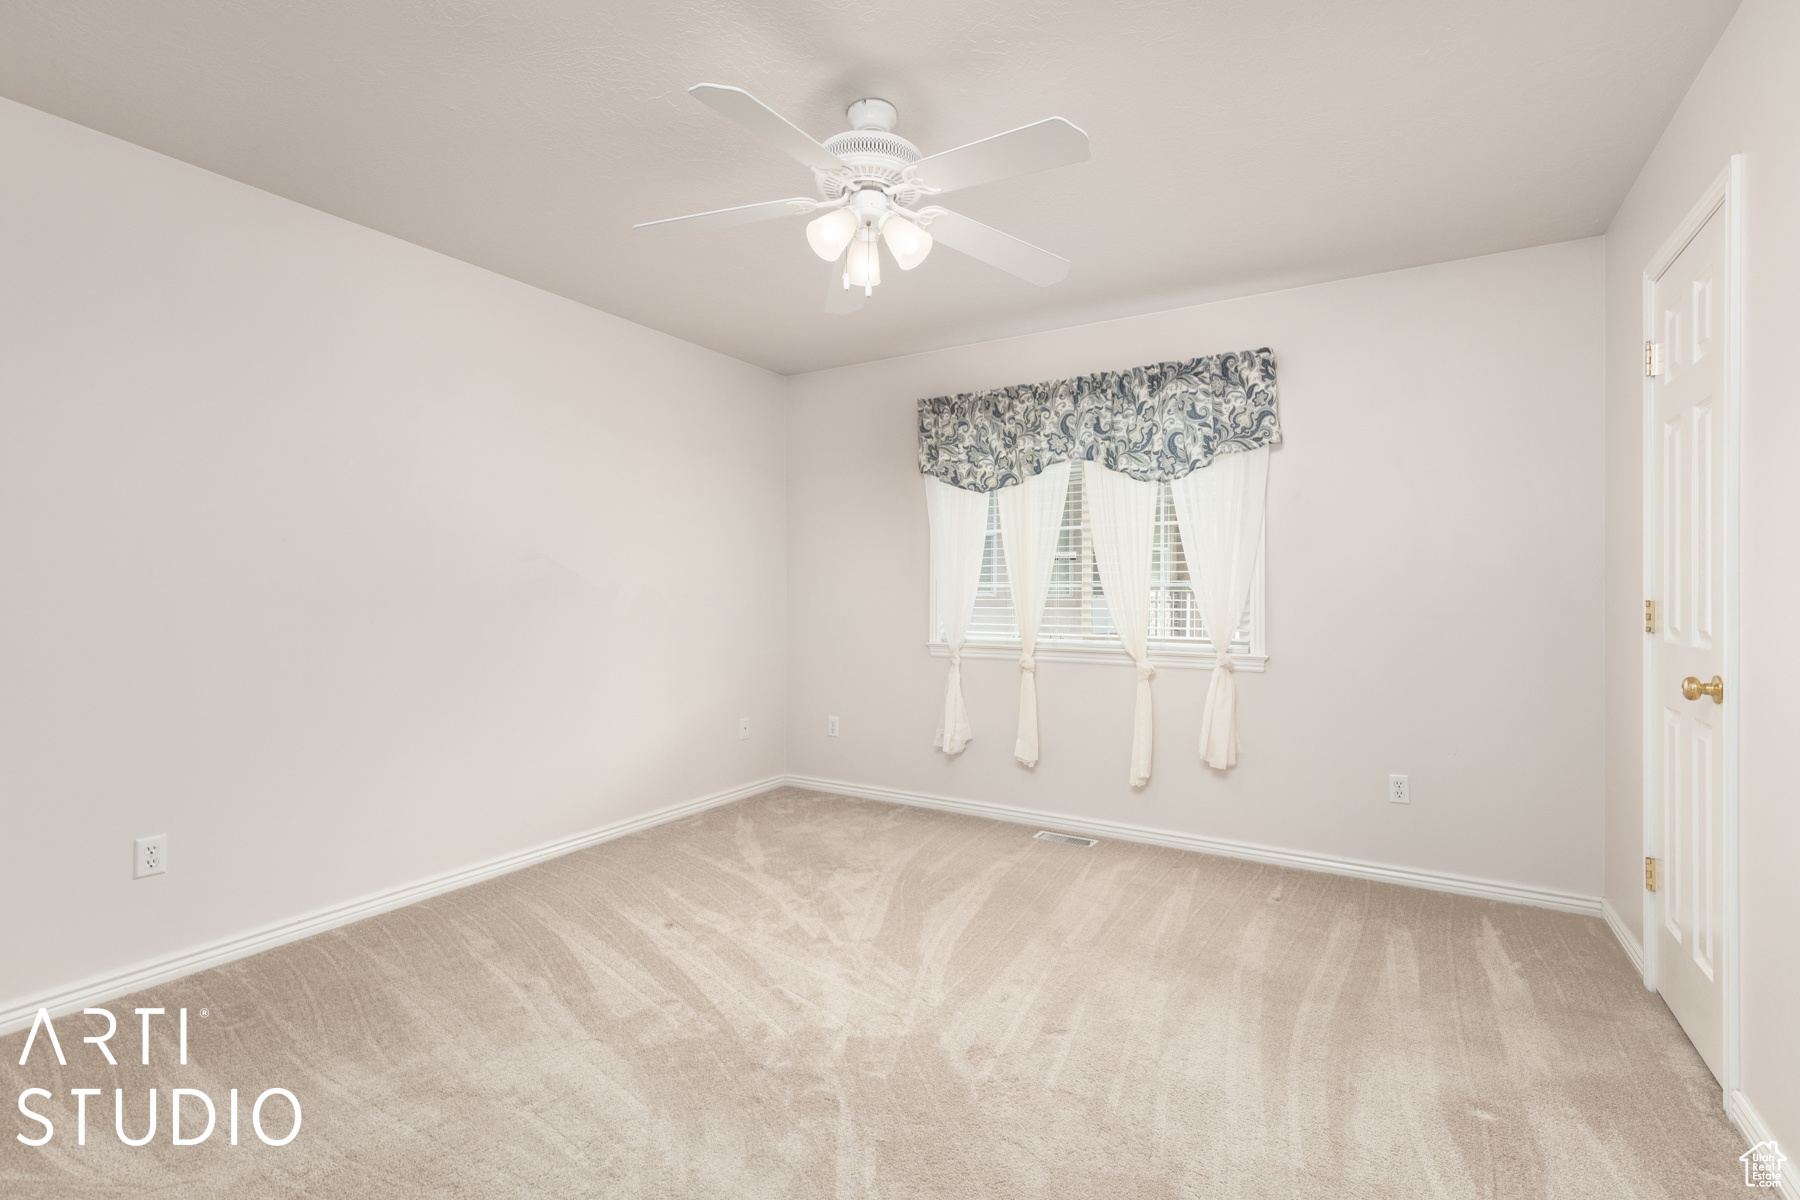 Unfurnished room featuring light carpet and ceiling fan